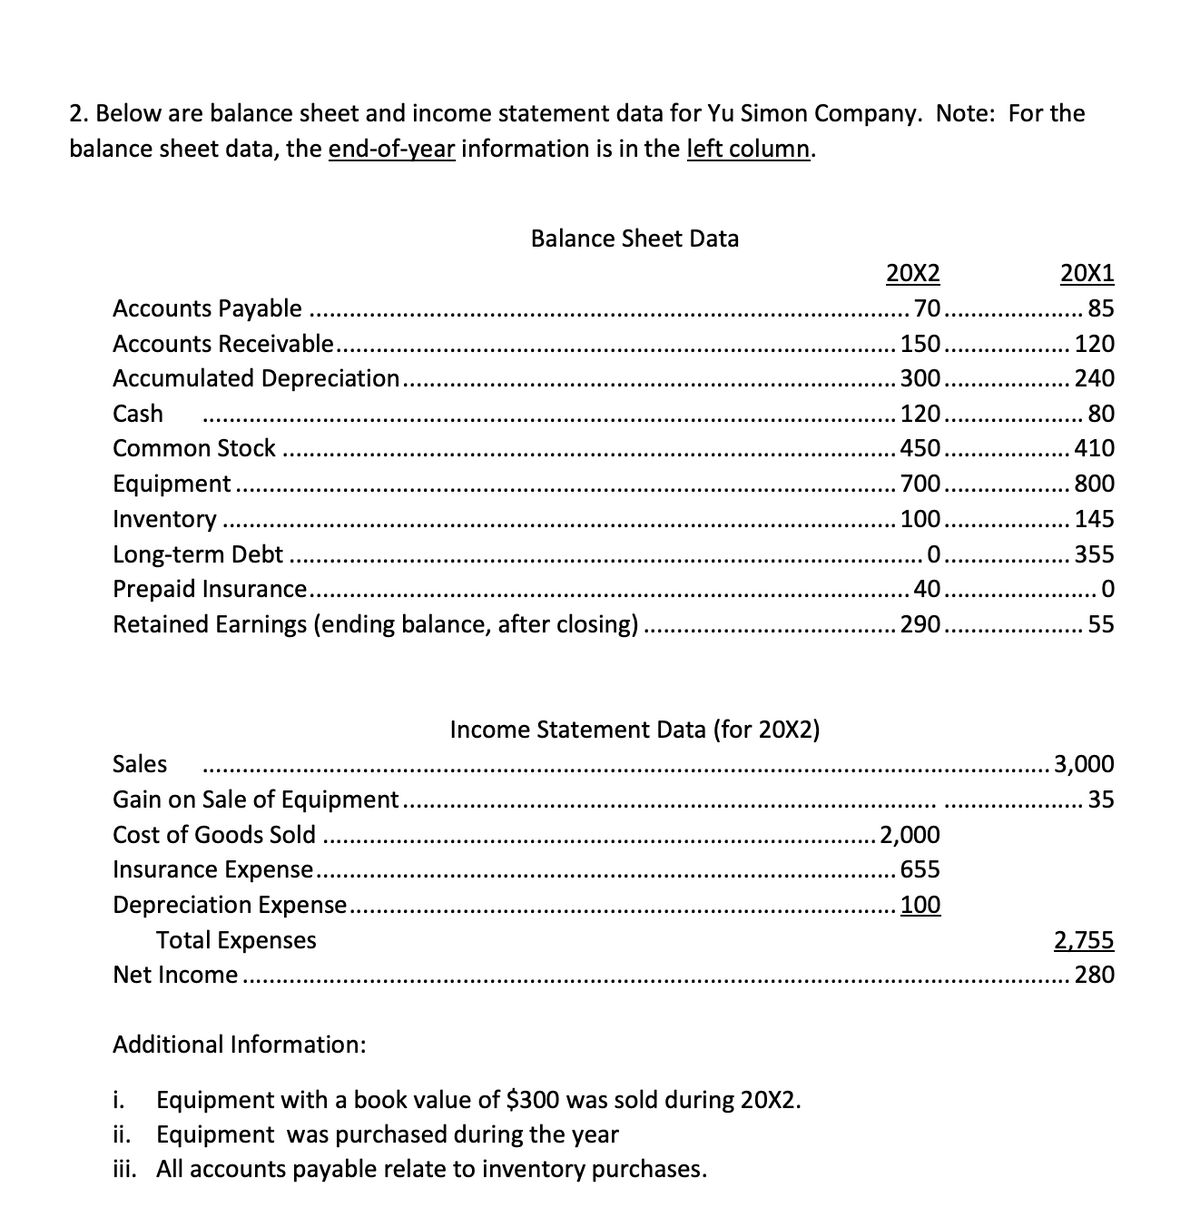 2. Below are balance sheet and income statement data for Yu Simon Company. Note: For the
balance sheet data, the end-of-year information is in the left column.
Accounts Payable
Accounts Receivable..
Accumulated Depreciation..
Cash
Common Stock
Equipment
Inventory
Long-term Debt
Prepaid Insurance..
Balance Sheet Data
20X2
20X1
70.
85
150
.......... 120
300.
240
120.
80
450.
410
700.
800
100
145
0.
355
40.
0
290
55
Retained Earnings (ending balance, after closing).
Income Statement Data (for 20X2)
Sales
Gain on Sale of Equipment..
Cost of Goods Sold
Insurance Expense.....
Depreciation Expense...
Total Expenses
Net Income
Additional Information:
i. Equipment with a book value of $300 was sold during 20X2.
ii.
Equipment was purchased during the year
iii. All accounts payable relate to inventory purchases.
3,000
35
.2,000
655
100
2,755
280